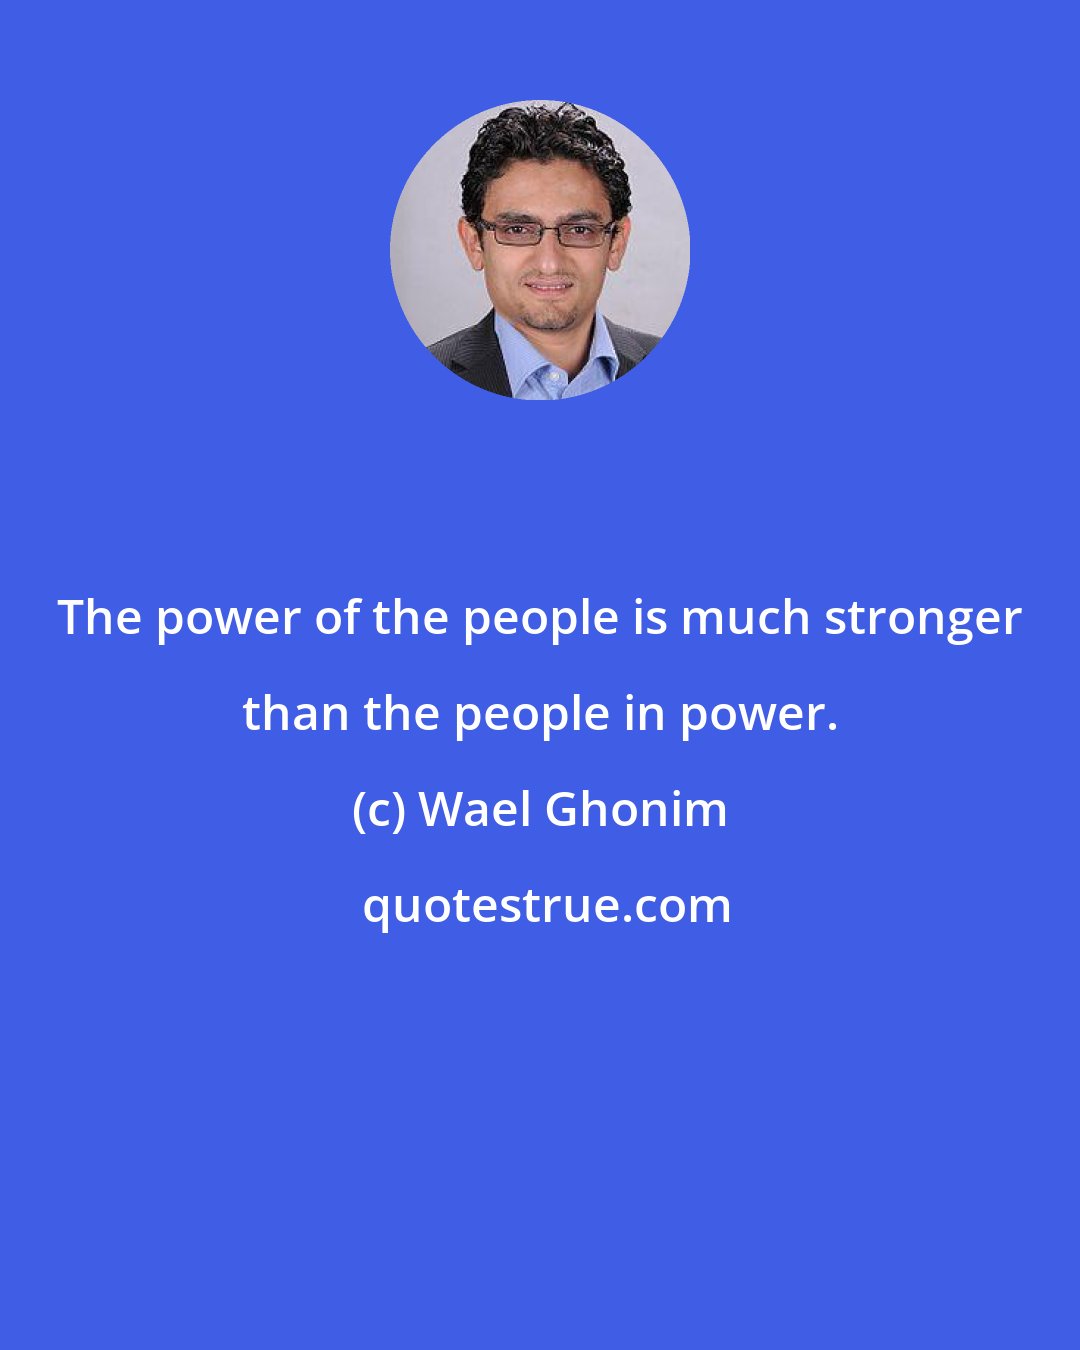 Wael Ghonim: The power of the people is much stronger than the people in power.